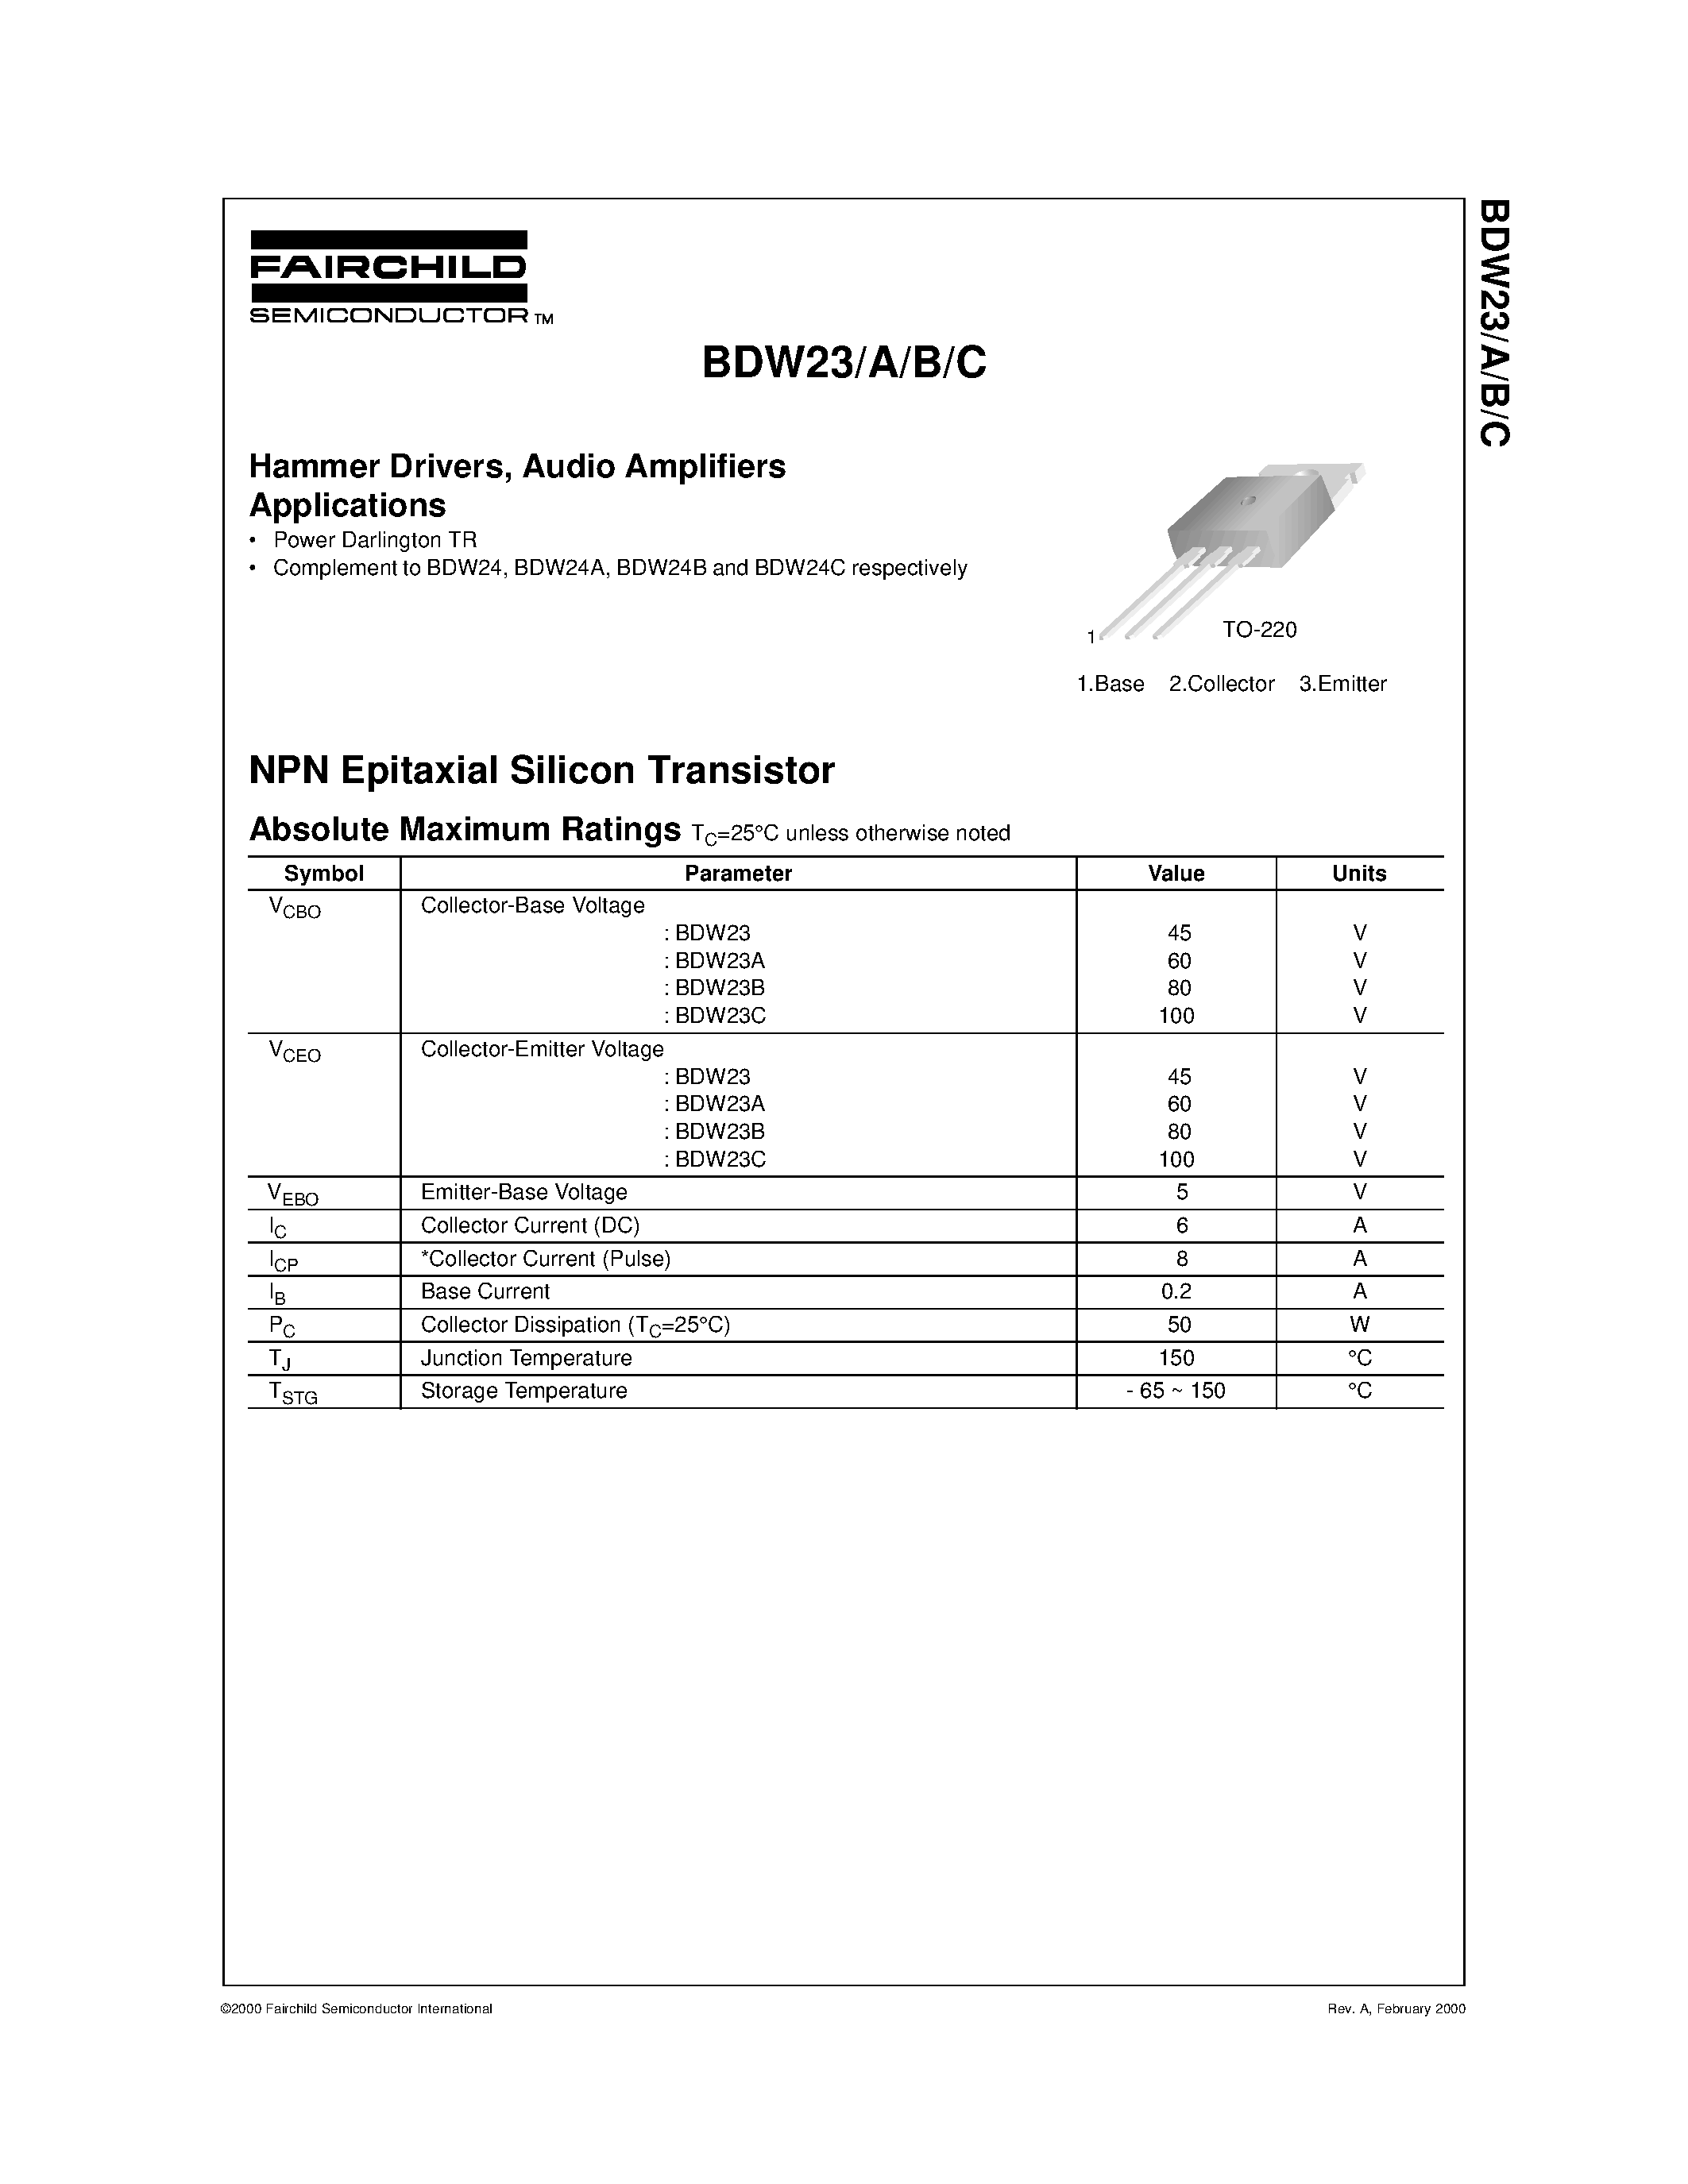 Datasheet BDW23C - Hammer Drivers/ Audio Amplifiers Applications page 1